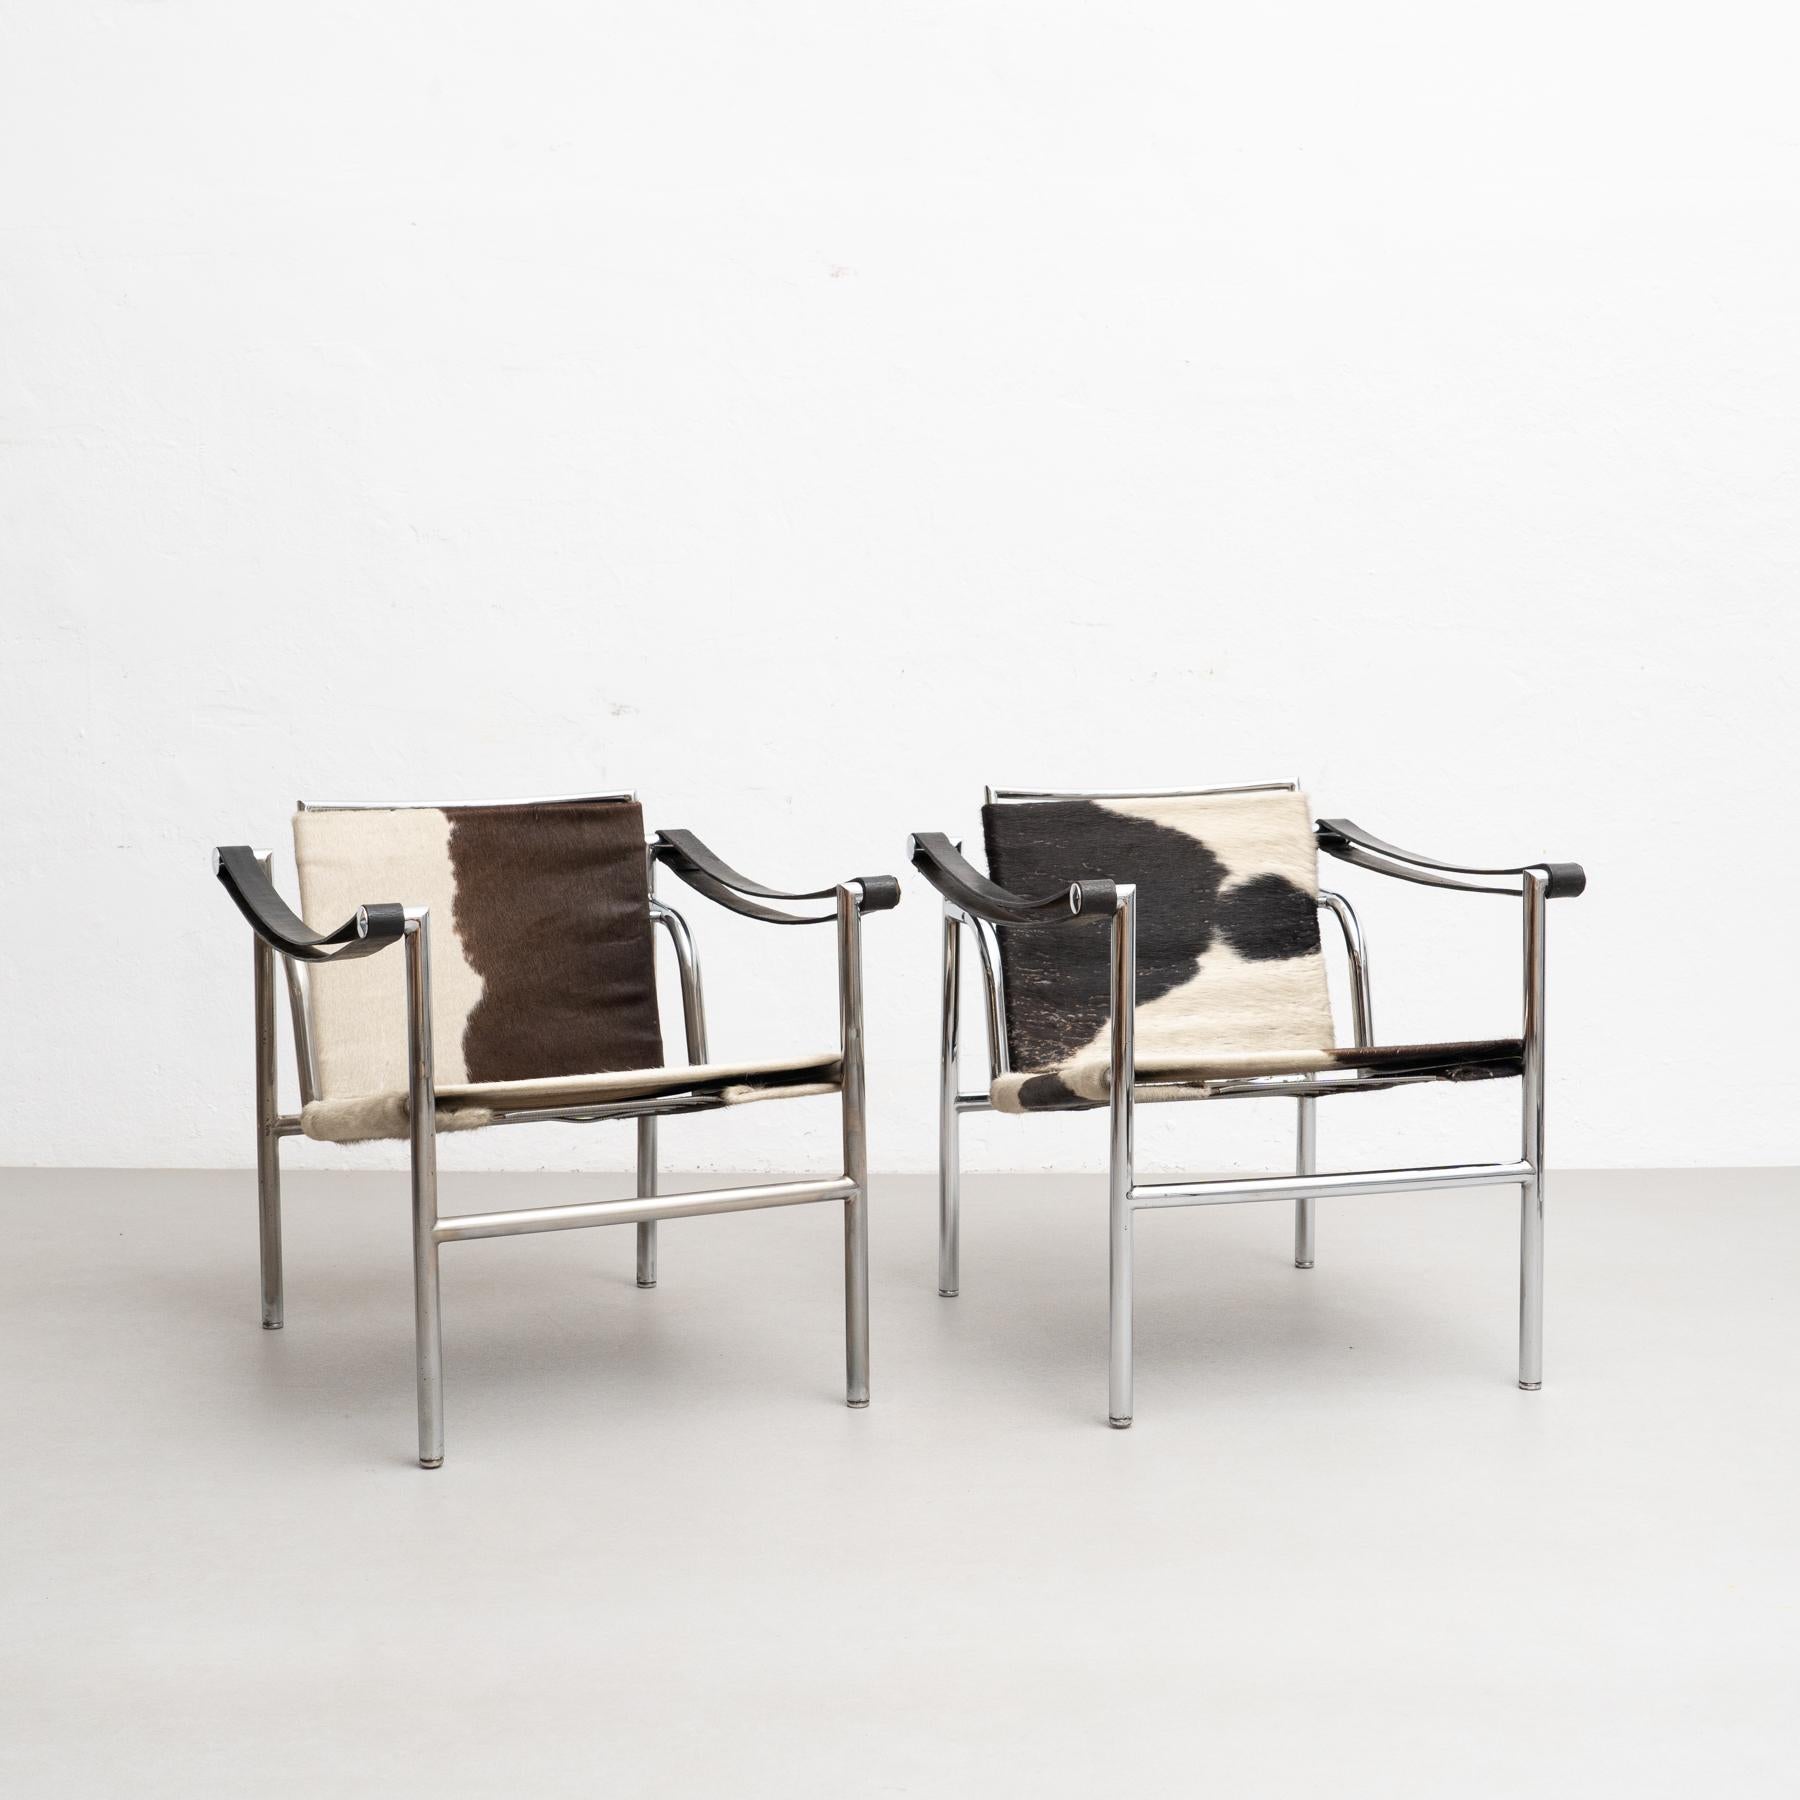 Italian Early Ed. Set of Two Lc1 Chairs by Le Corbusier, Charlotte Perriand by Cassina